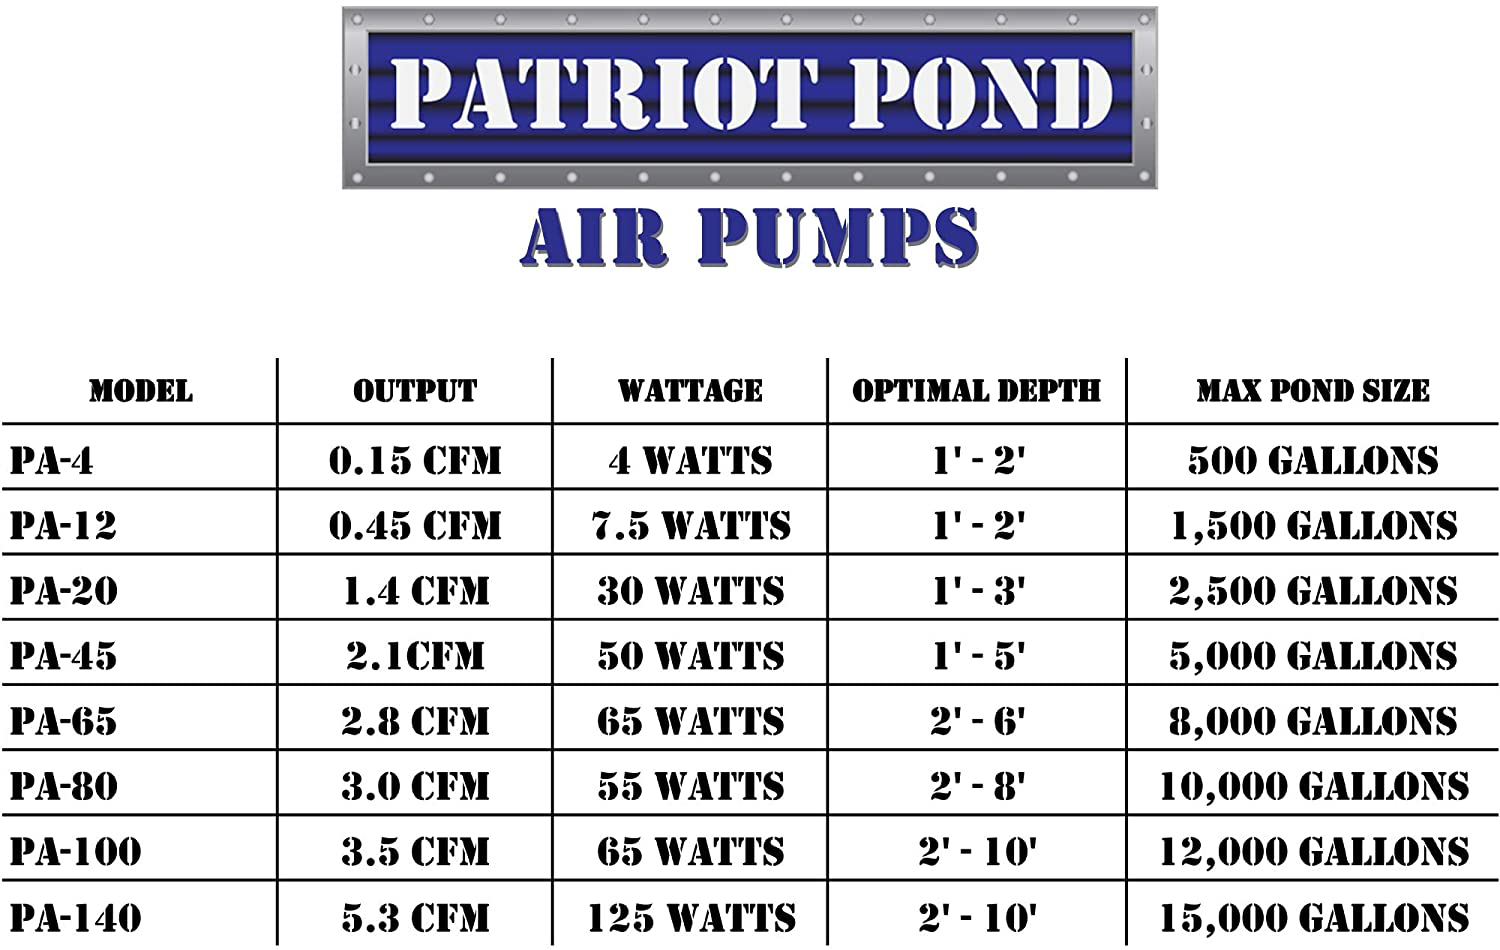 HALF off PONDS Patriot Pond 0.45 Cubic Feet per Minute Air Pump for Aquariums, Tanks, and Ponds to 1,500 Gallons, Water Gardens & Fish Ponds - PA-12